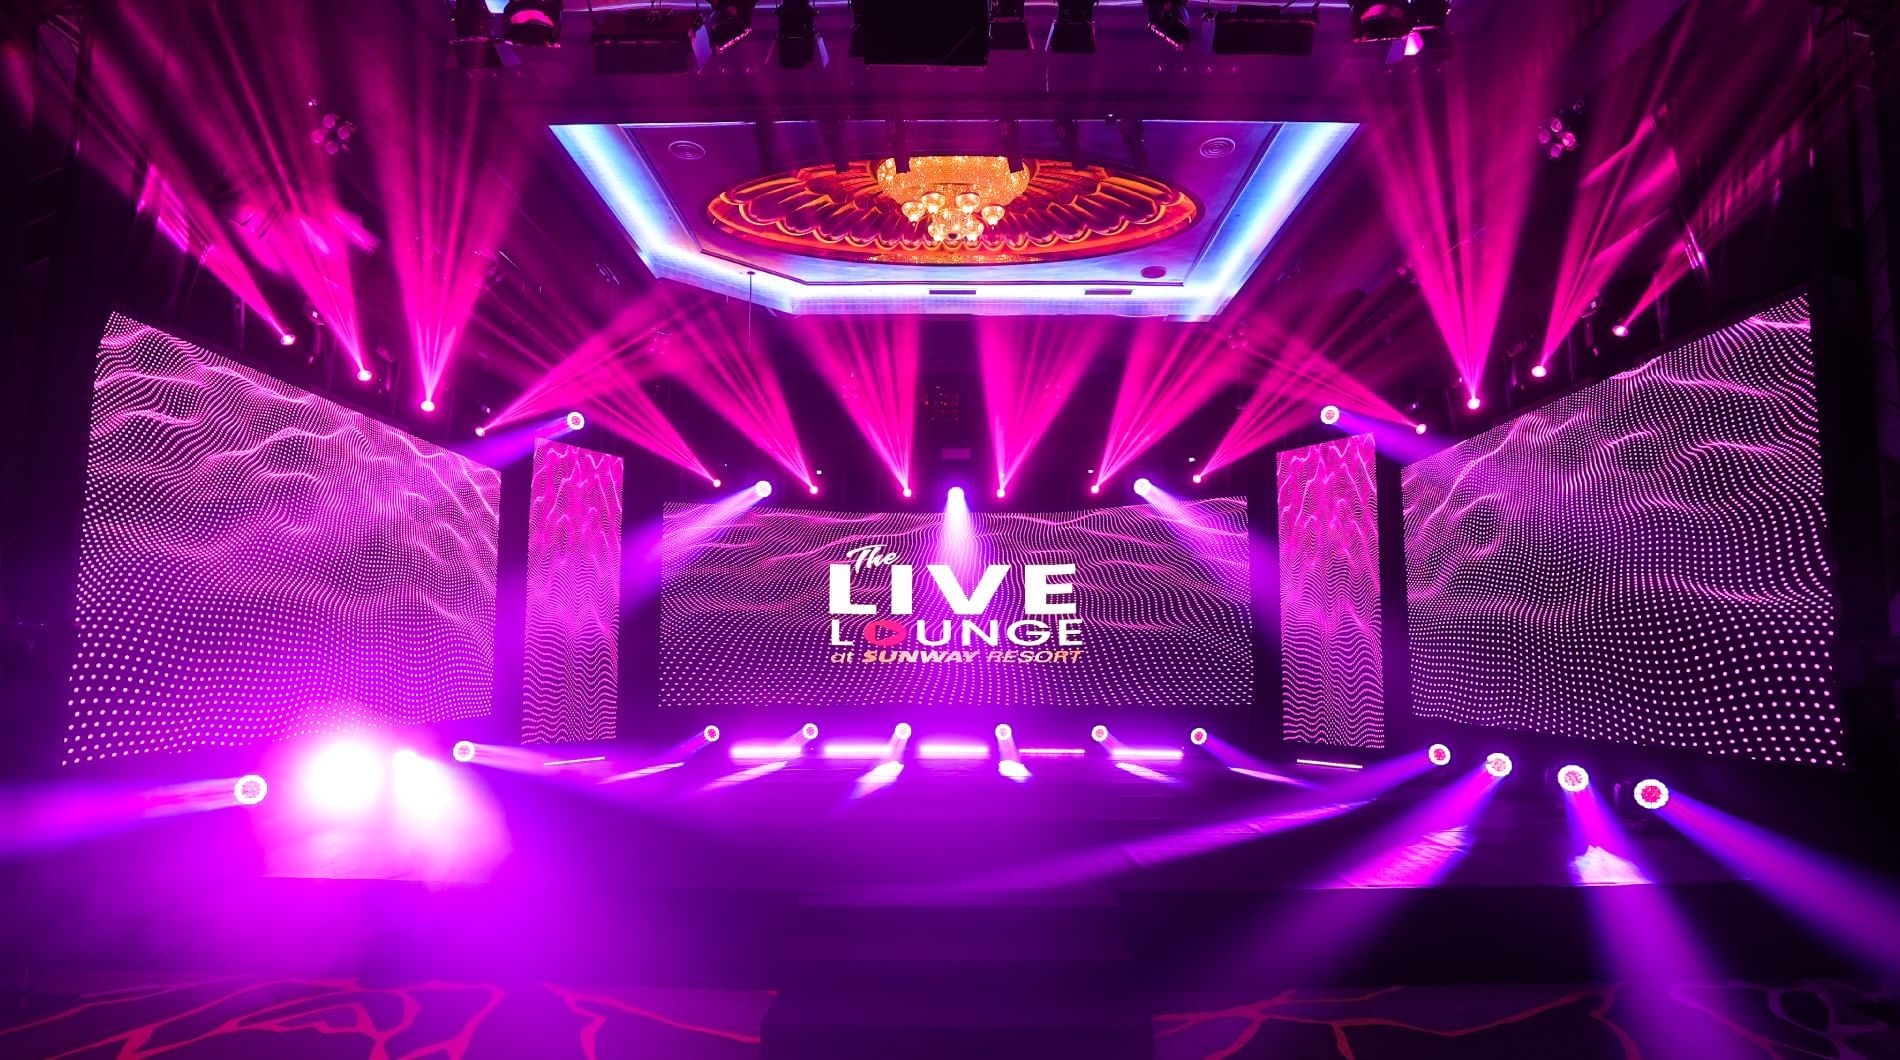 Lighting setup on a stage at an event in Sunway Lagoon Hotel